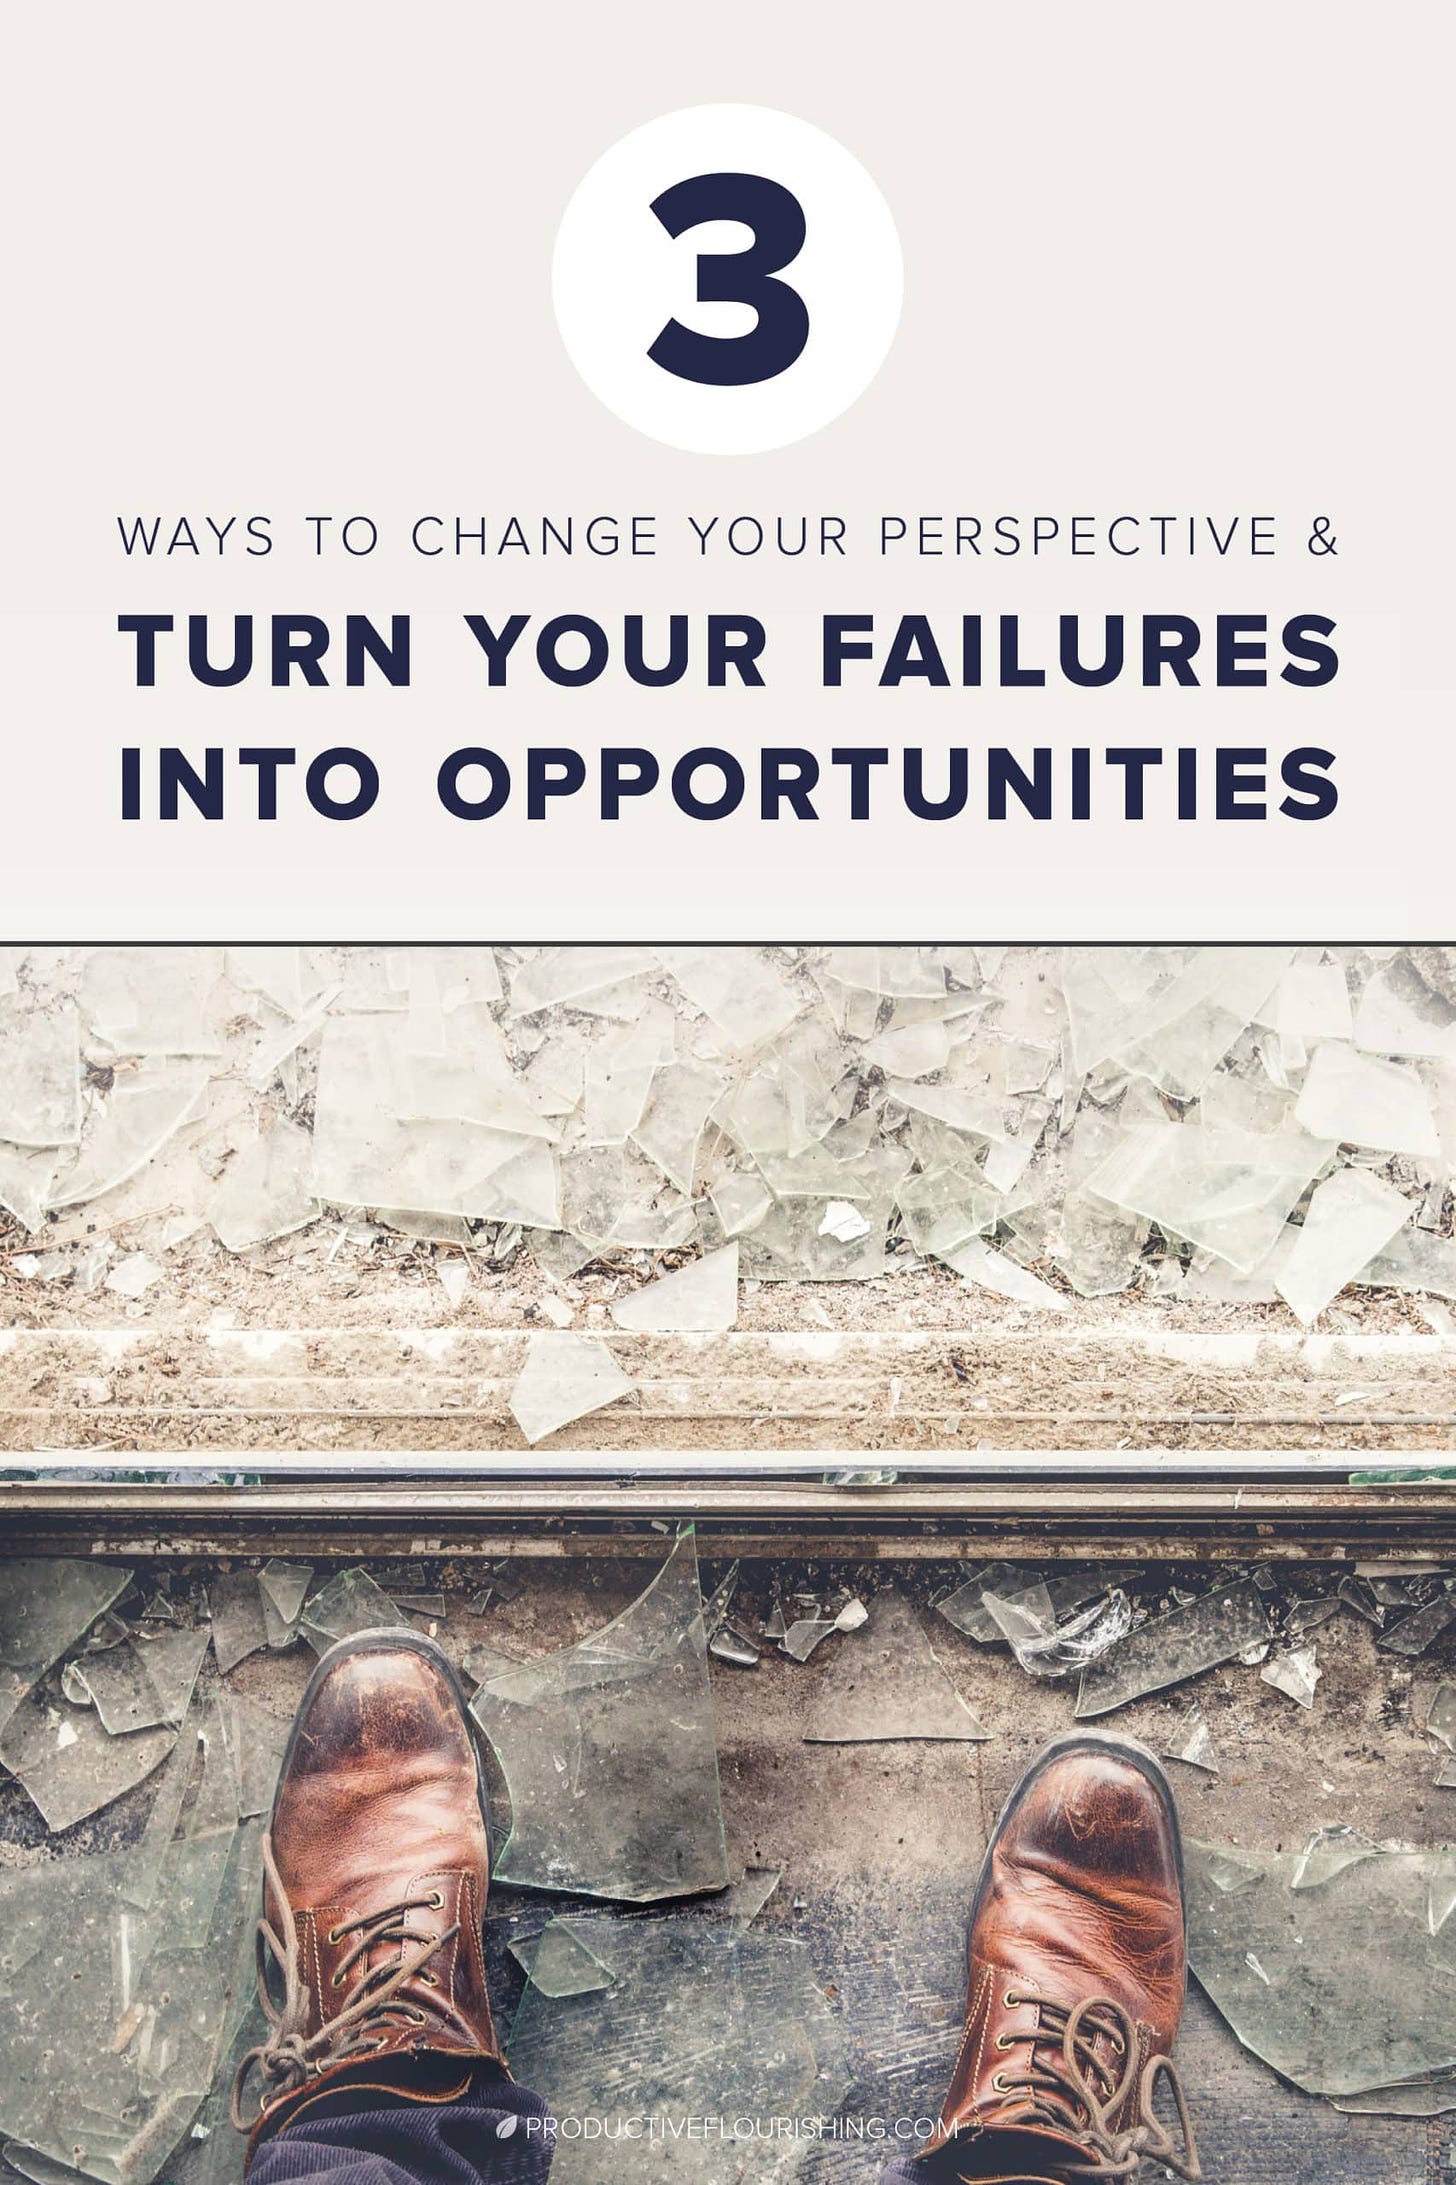 Here are a few ways you can turn your failures into opportunities (AKA handle your setbacks in a way that also propels you onward and upward). It’s inevitable that when we embark on ambitious endeavors, there will be setbacks. Learn three ways to turn your failures into opportunities. #businessfailure #entrepreneurgoals #productiveflourishing